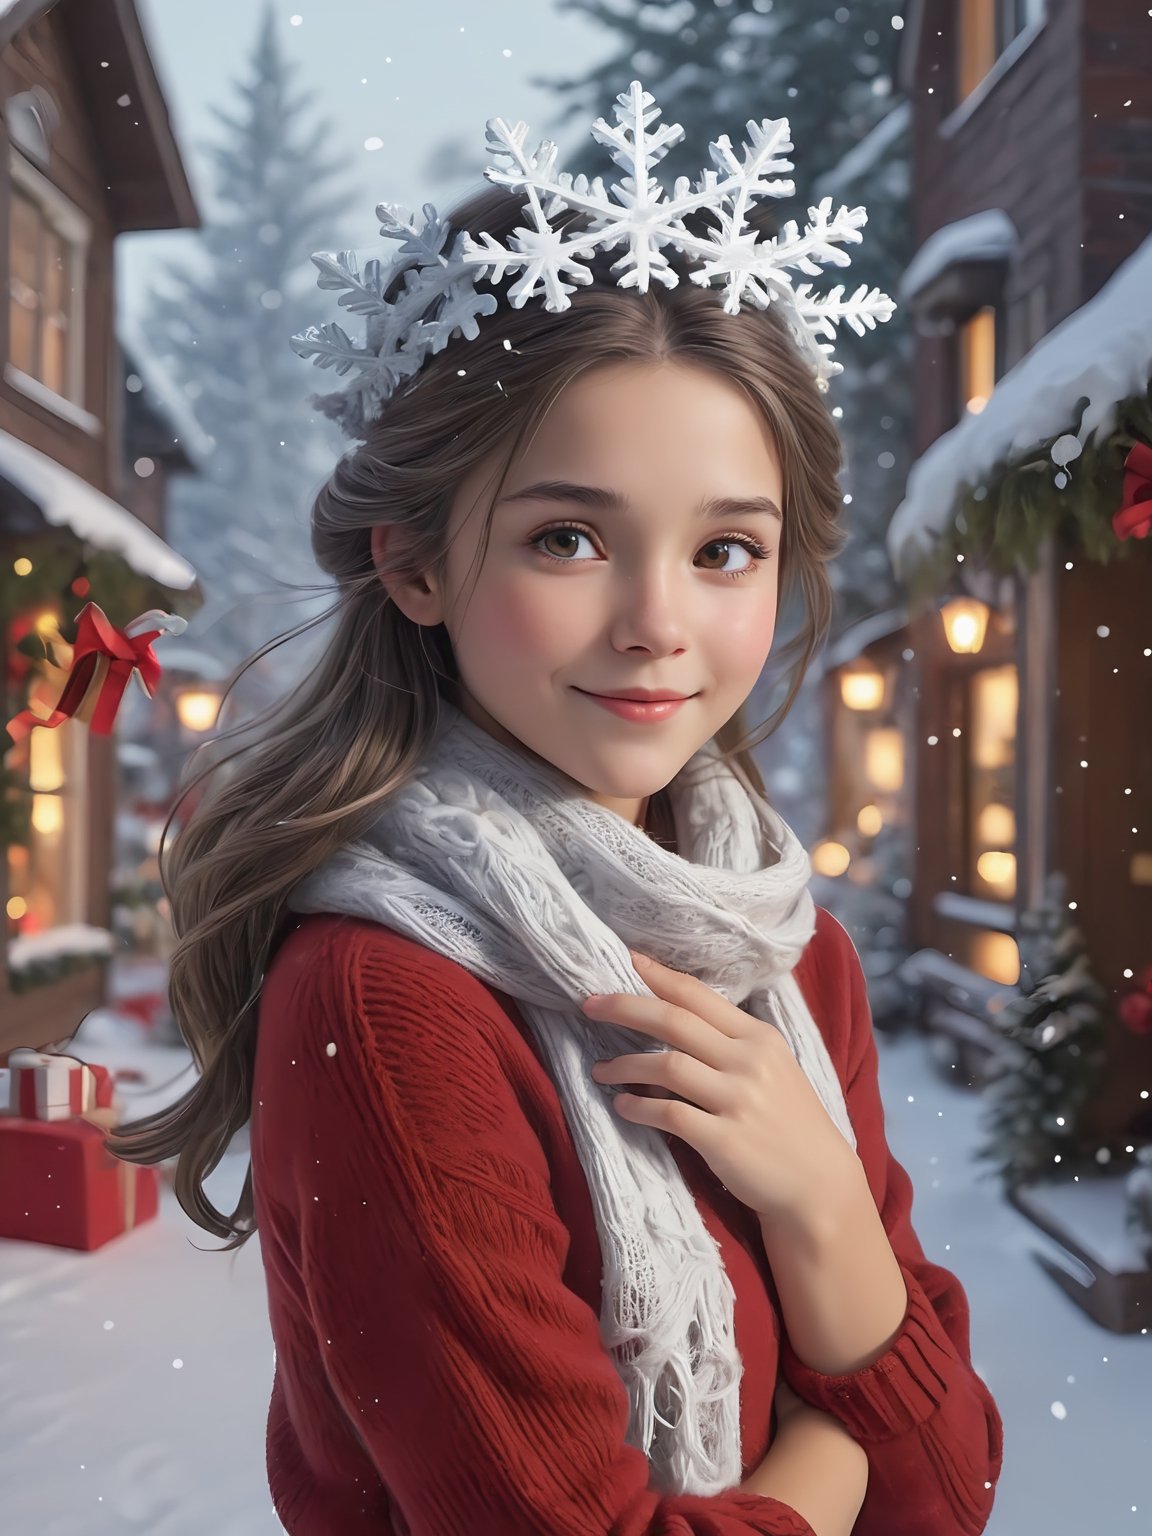 In this Christmas scene, a petite girl twirls around piles of presents, She wears a red Christmas hat, and her long hair dances in the chilly breeze. Wrapped in a deep red wool sweater, her scarf is adorned with delicate snowflake patterns.

The cold air tinges her cheeks with a slight rosy hue, while her eyes sparkle with warm anticipation. The slightly upturned face reveals a hope for the Christmas miracle. Snowflakes create a silver crown on her hair, as if crafting an ice and snow tiara for her.

Though her hands are not visible from behind, her posture exudes tranquility and expectation. Surrounding her is a silver-clad snowy scene, with a Christmas tree adorned with dazzling lights and gifts. The entire scene emanates warmth and joy, as if the magic of Christmas is about to unfold around her.